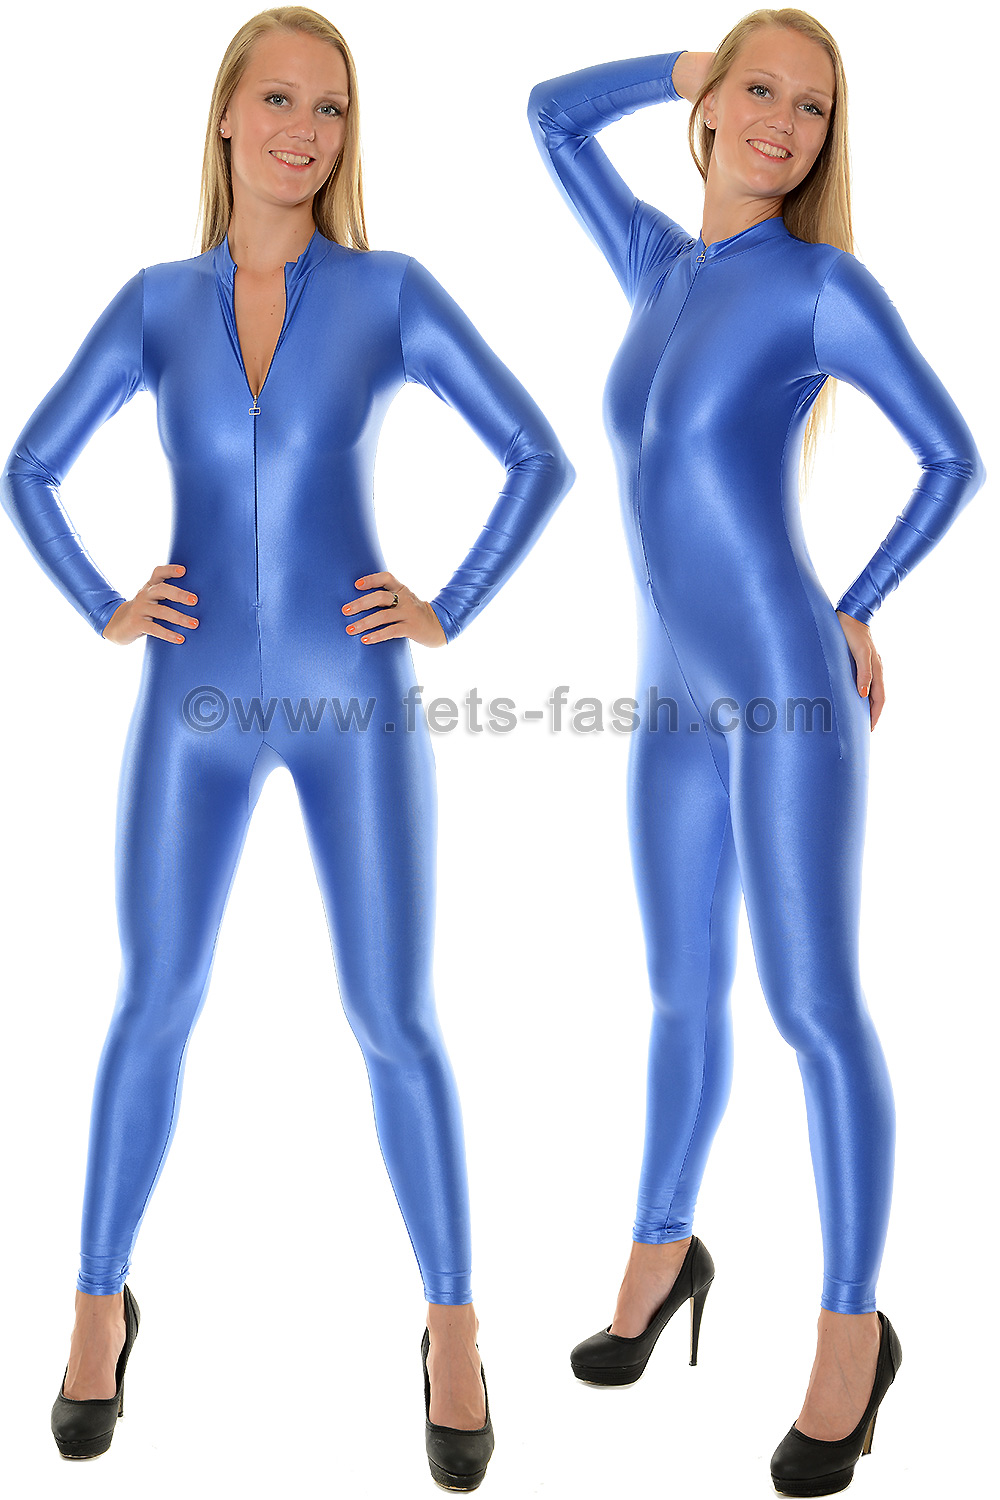 Catsuit With Front Zipper From Fets Fash In Elastane Royal Blue